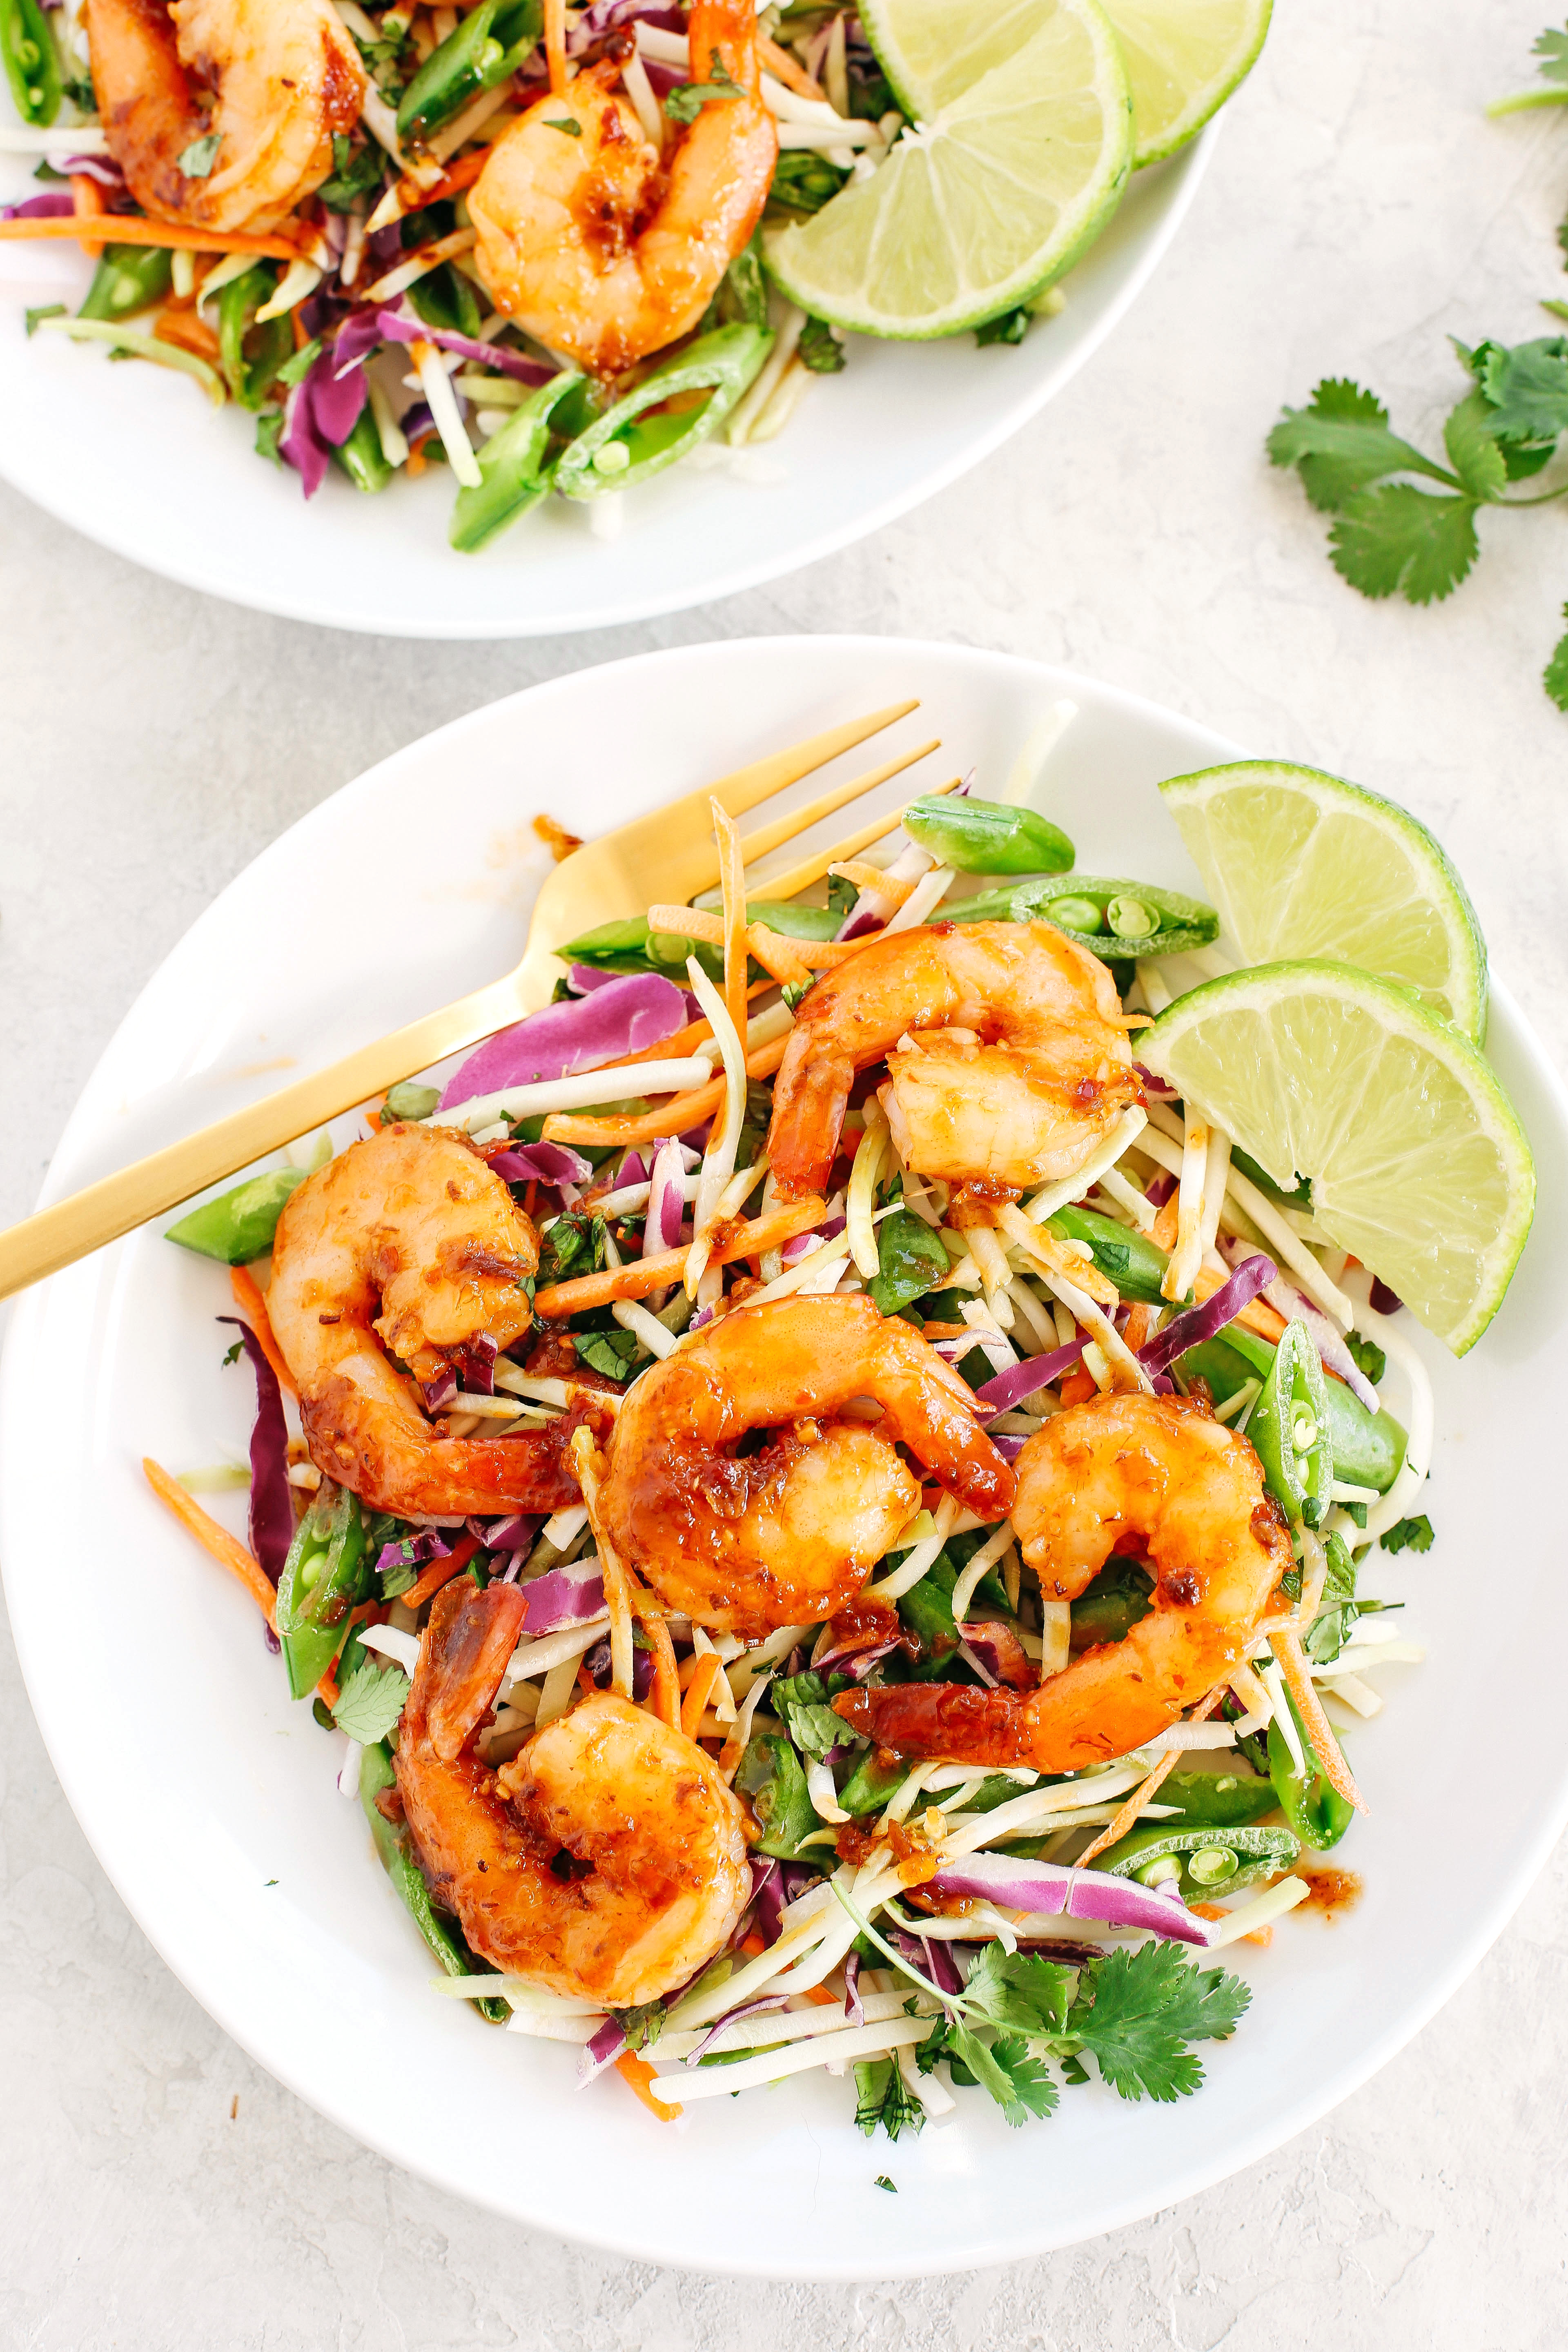 This quick and EASY Asian Shrimp Salad with Ginger Sesame Dressing is complete with all your favorite flavors, crunchy veggies and fresh herbs that can be easily made in just minutes!